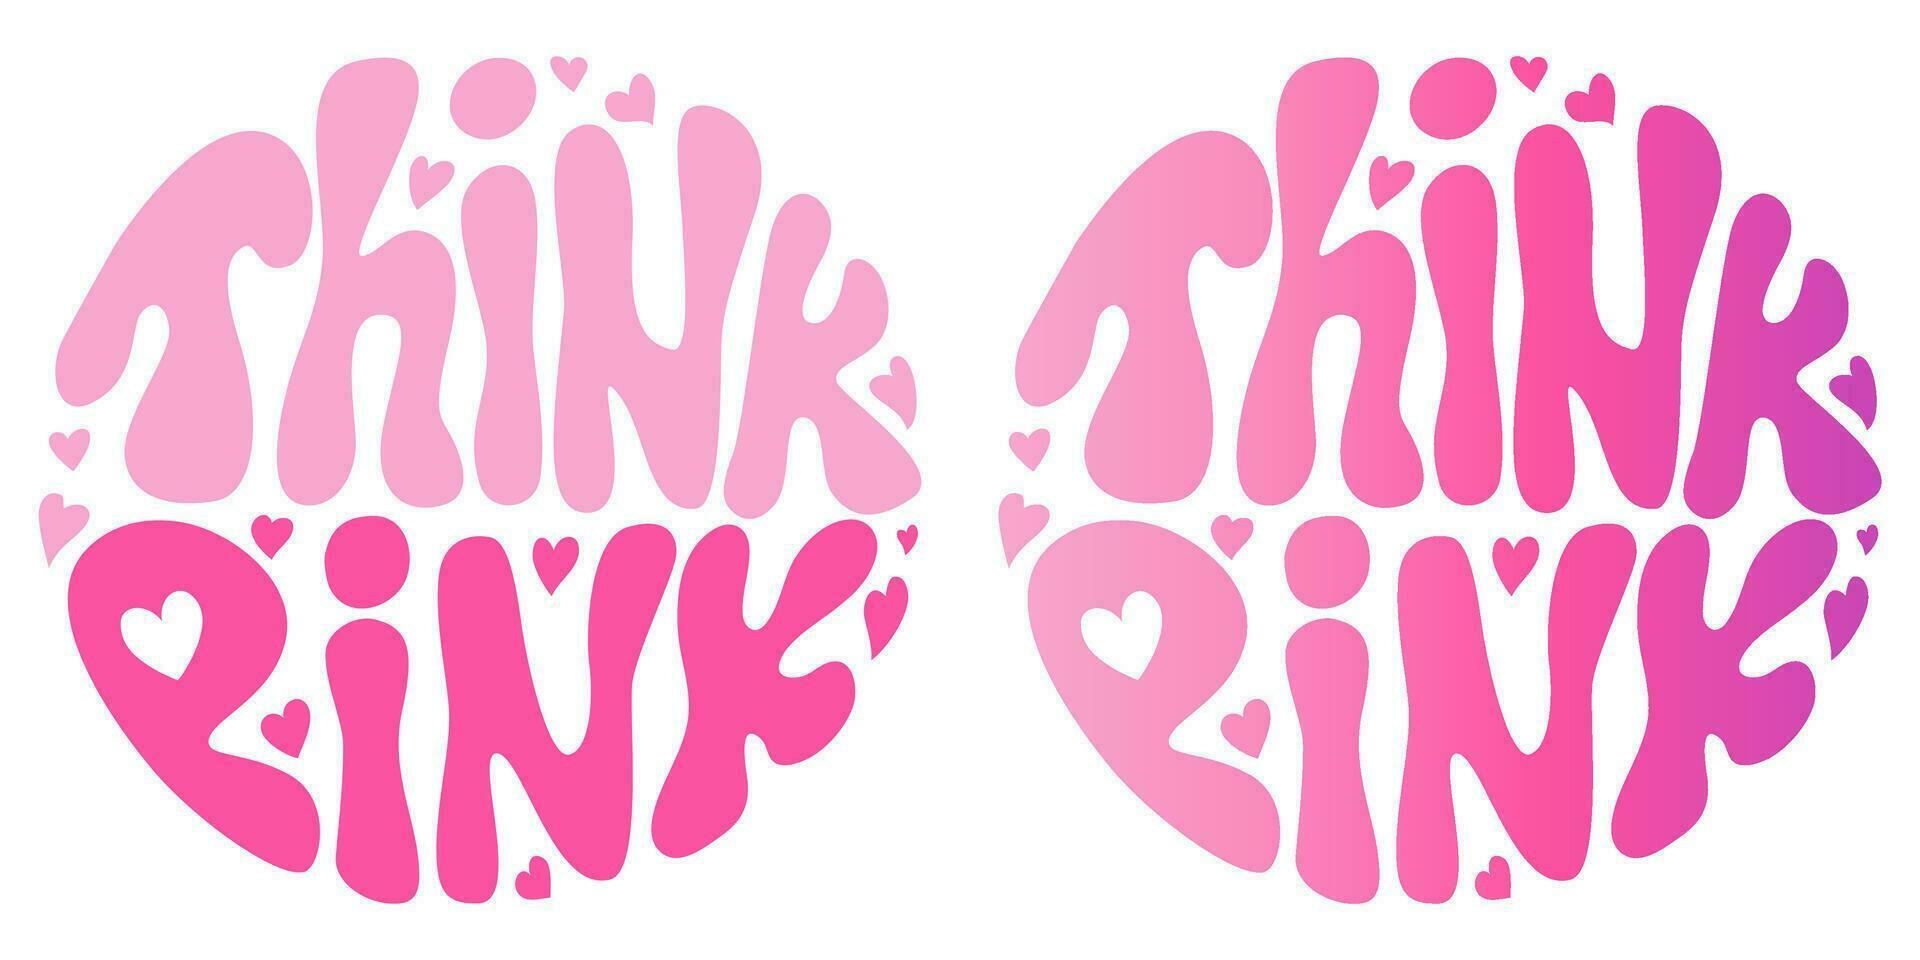 Handwritten retro groovy lettering Think Pink with hearts. Aesthetic 2000s style. Pinkcore. Slogan in round shape. Trendy groovy print design for posters, cards, tshirts. vector